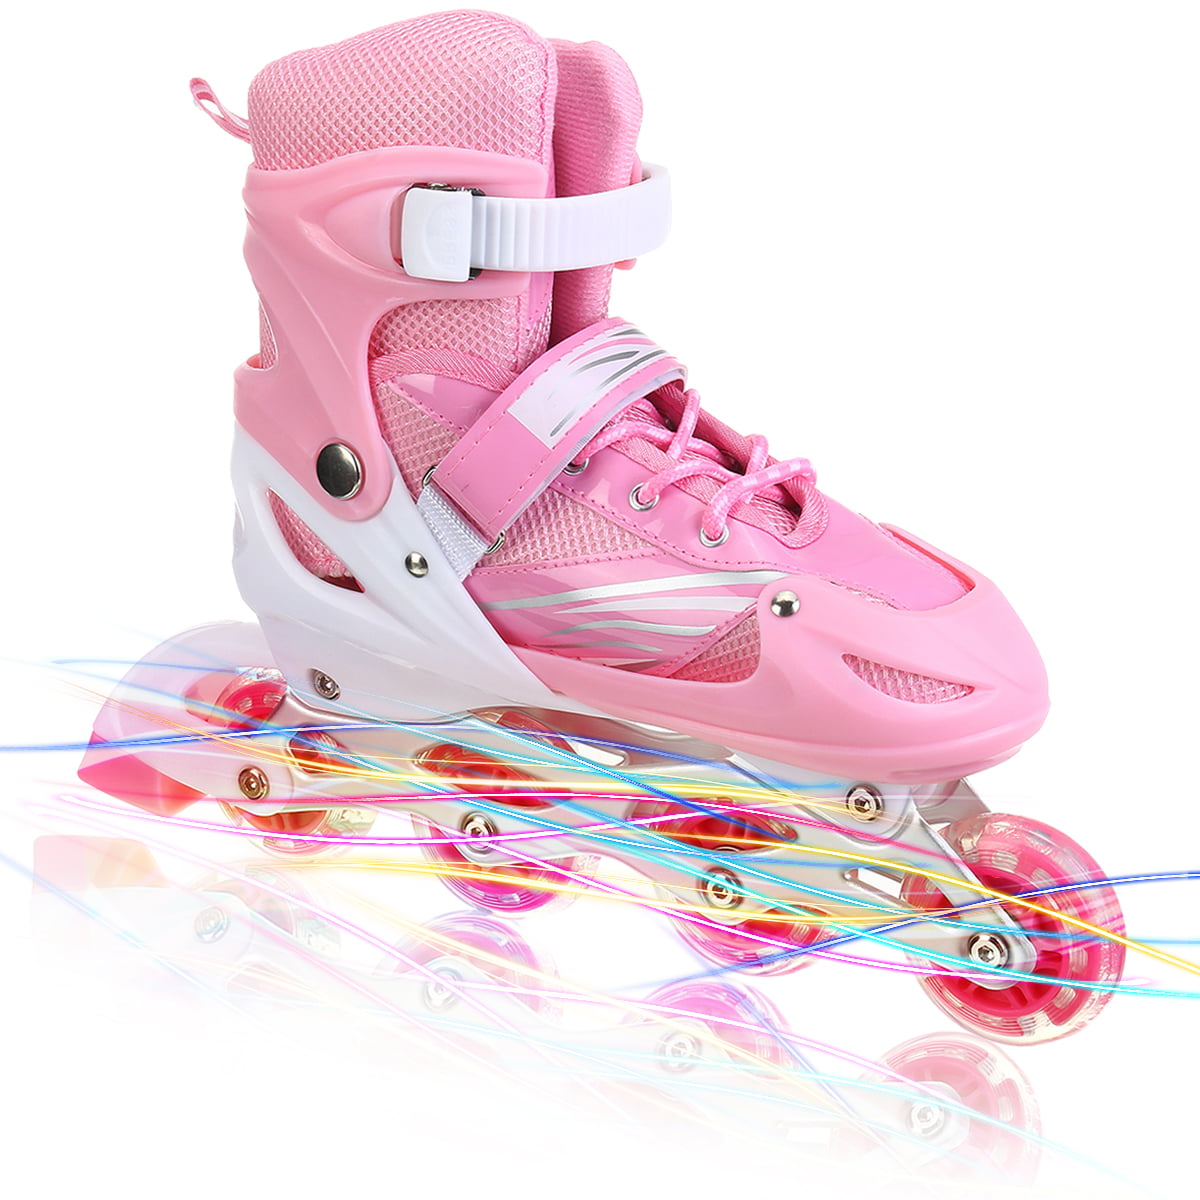 Pink Girls Inline Skates 4 Size Adjustable with Full Light Up Wheels,Fun Illuminating Roller Skates Blading for Kids and Youth,Men and Women 